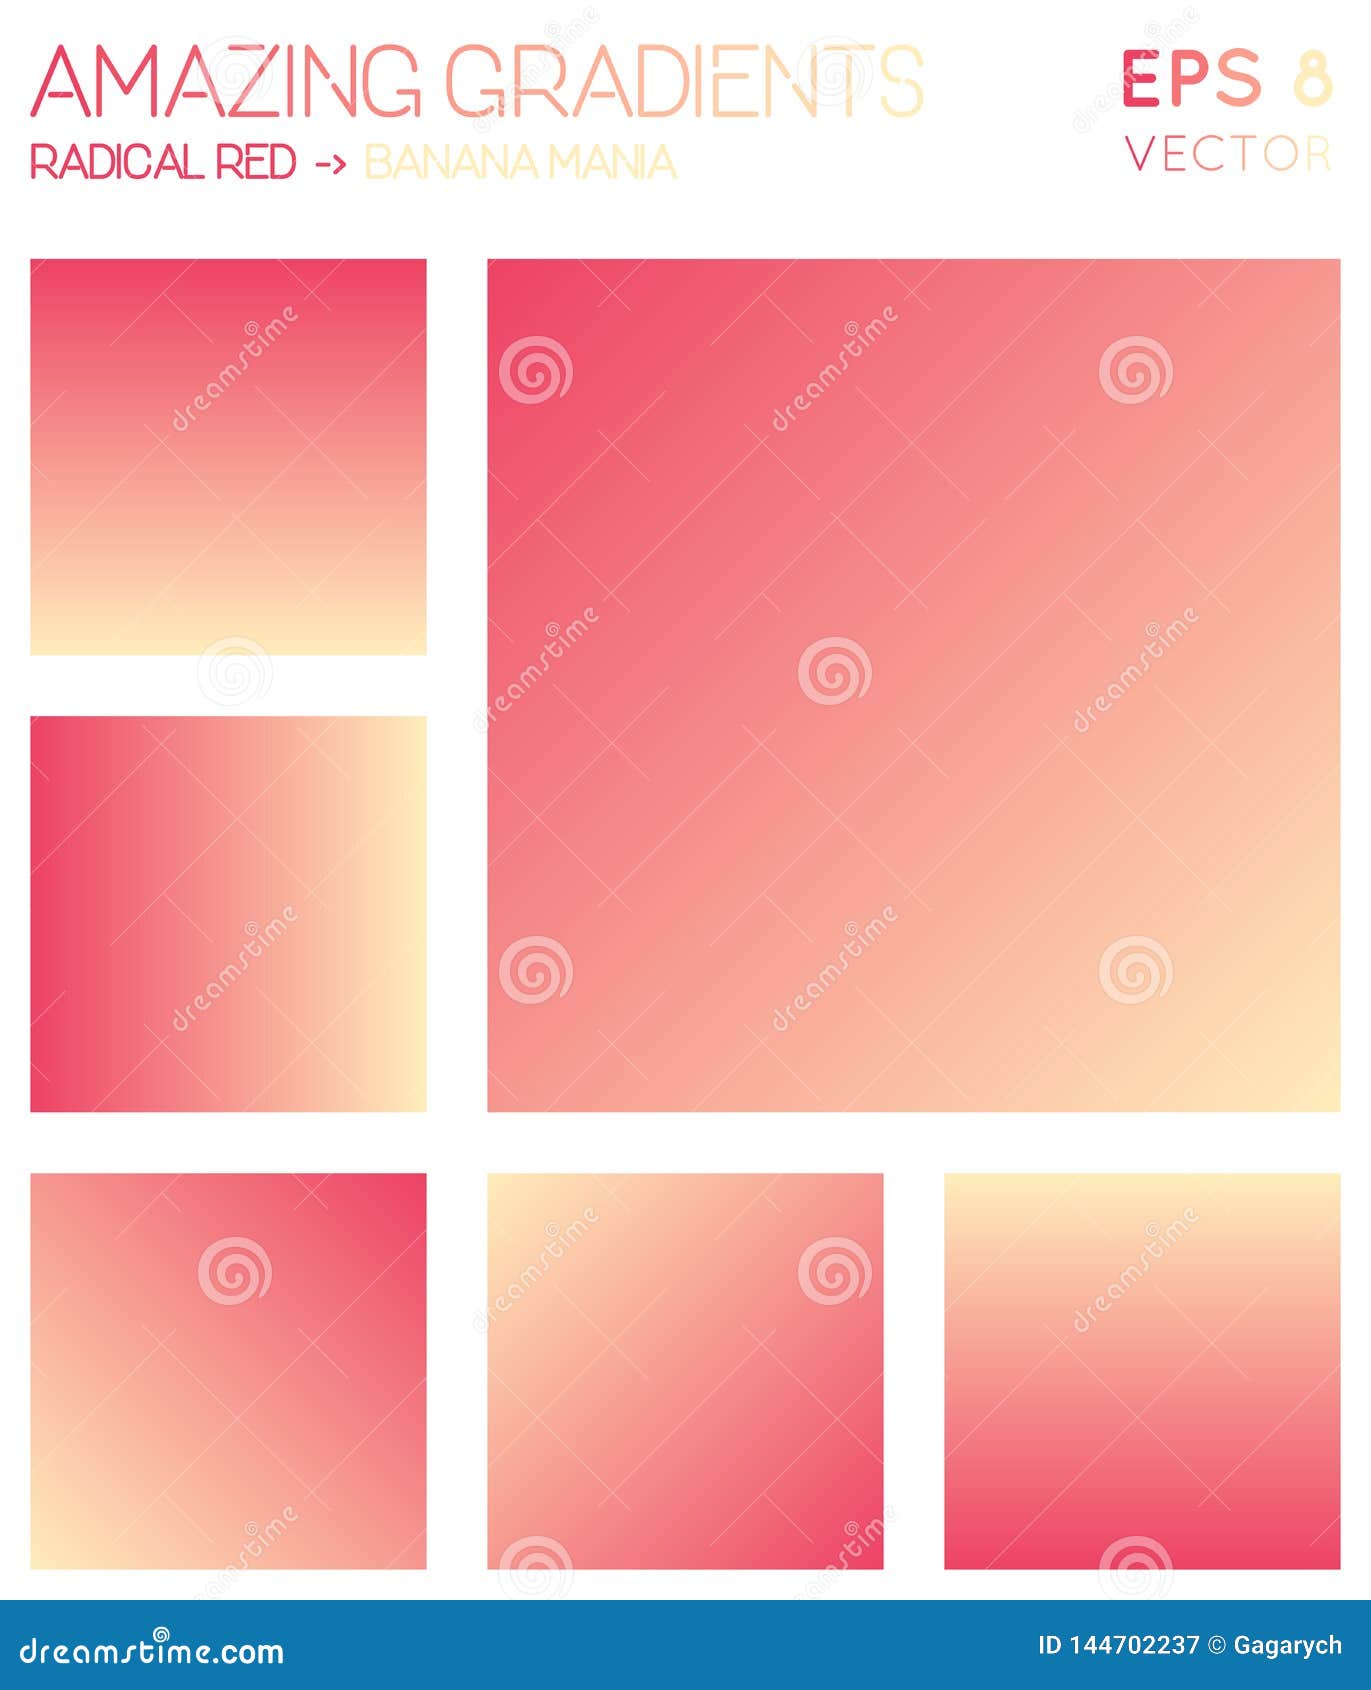 Download Colorful Gradients In Radical Red, Banana Mania. Stock Vector - Illustration of colorful ...